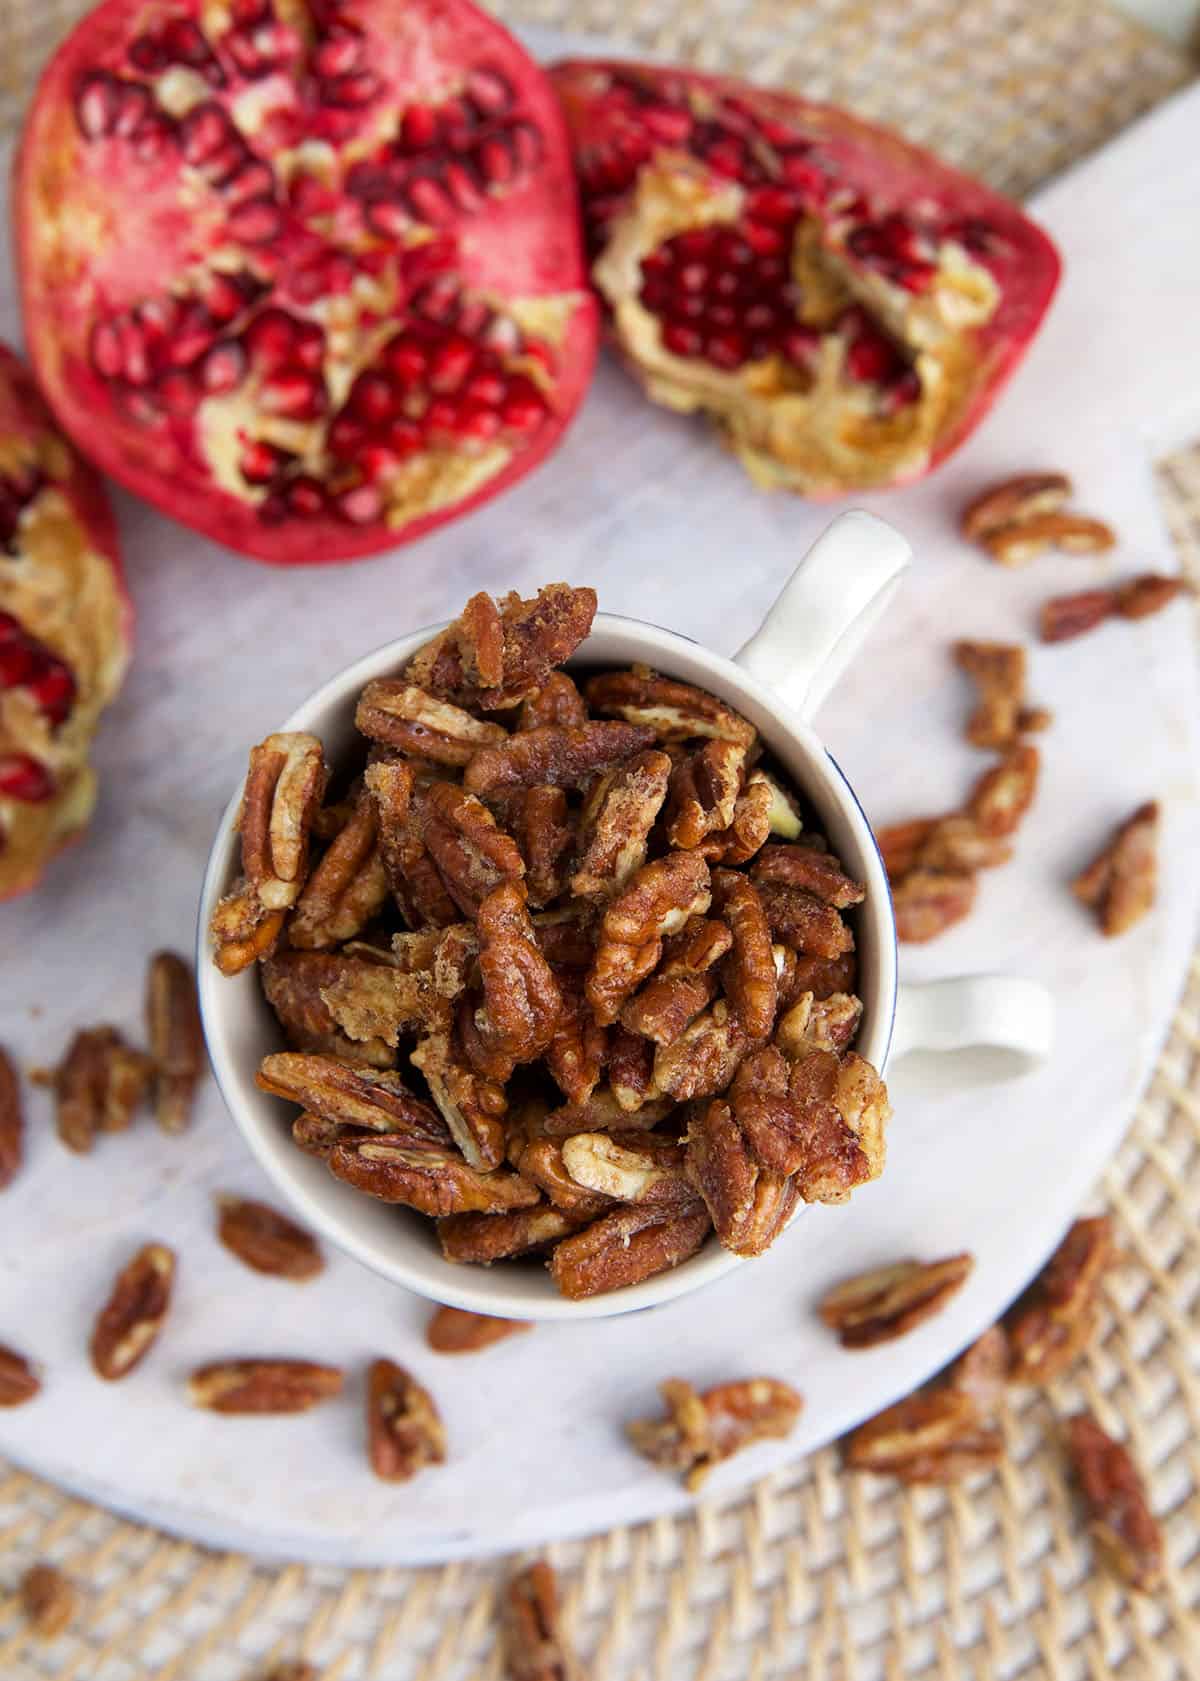 A pomegranate is placed next to a cup of candied pecans